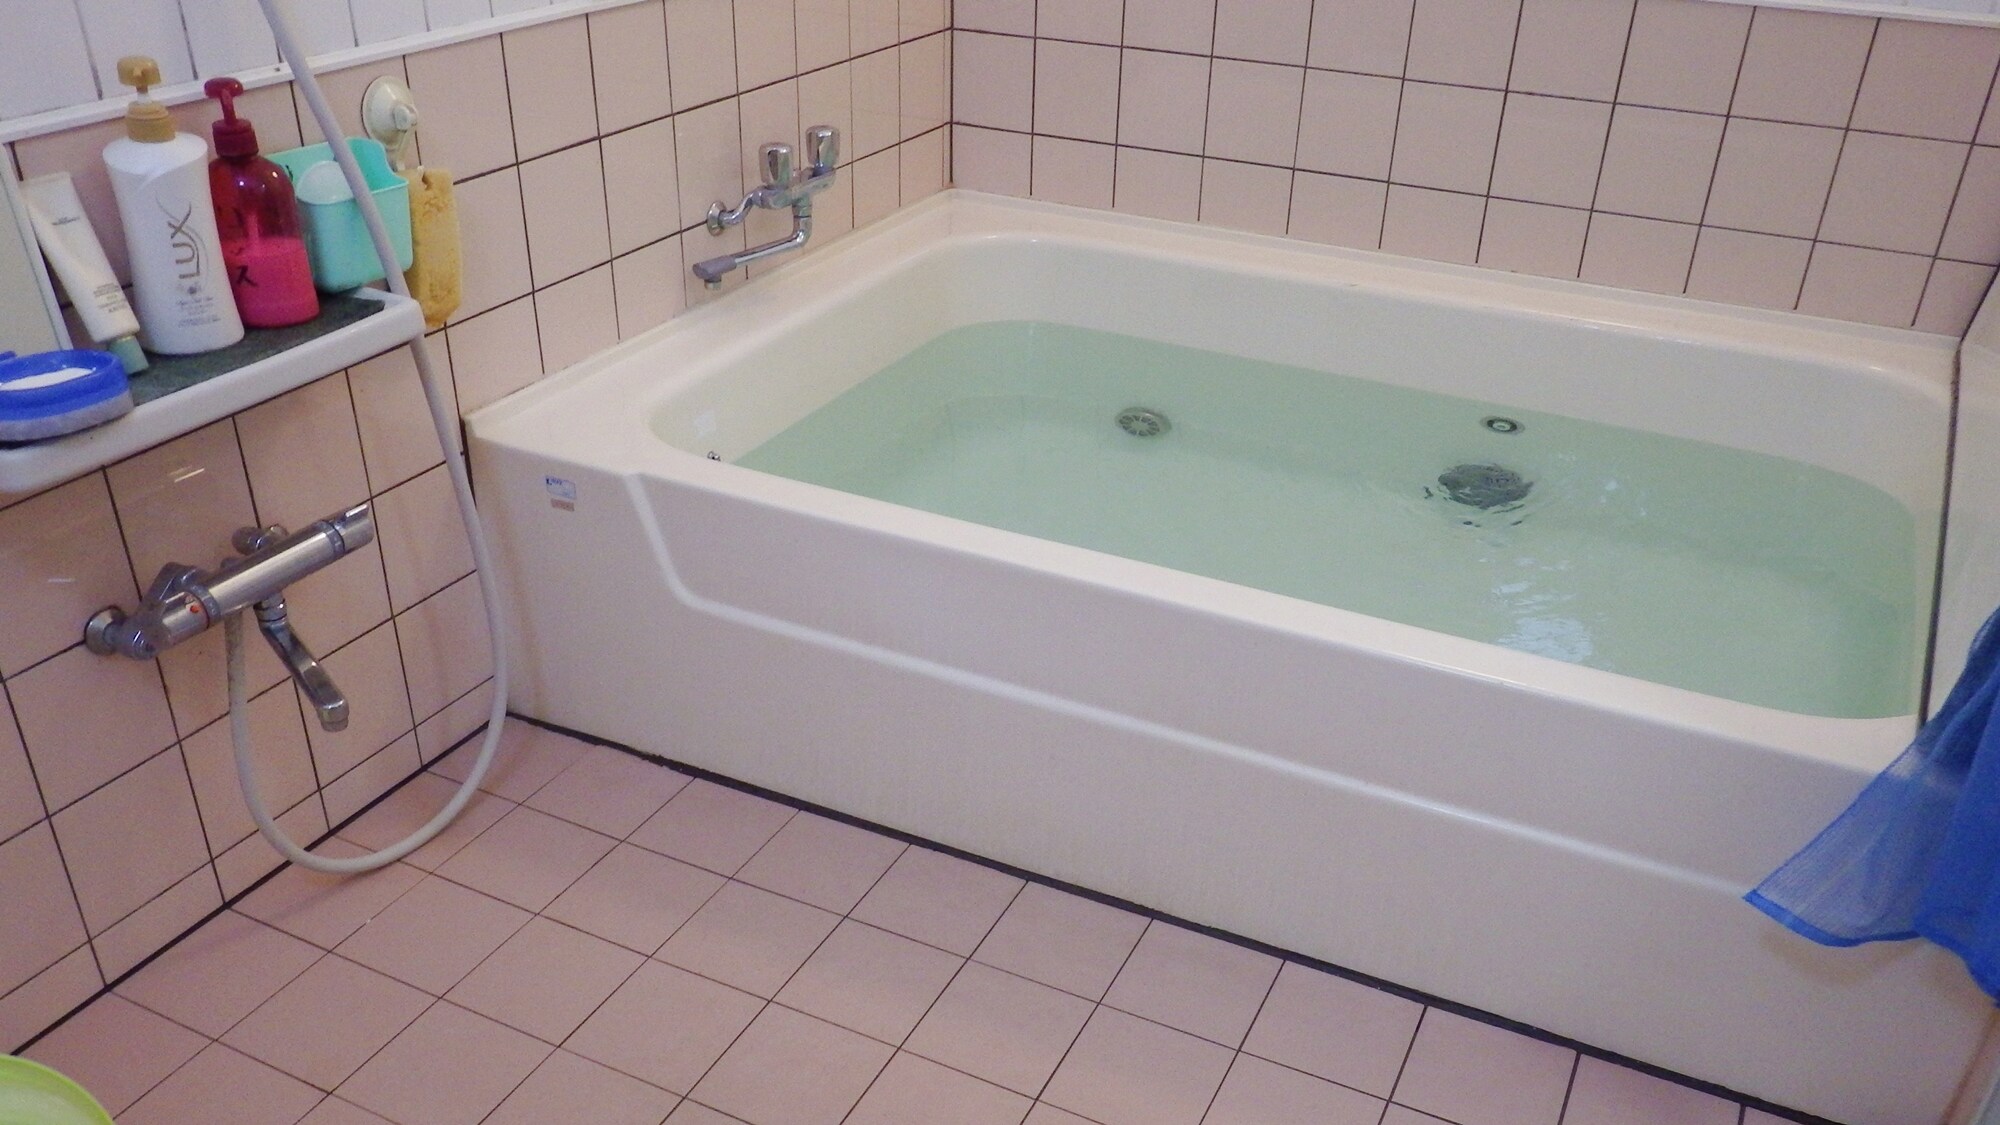 * [Bath] There is one family bath. Please take a private bath in order when it is free.